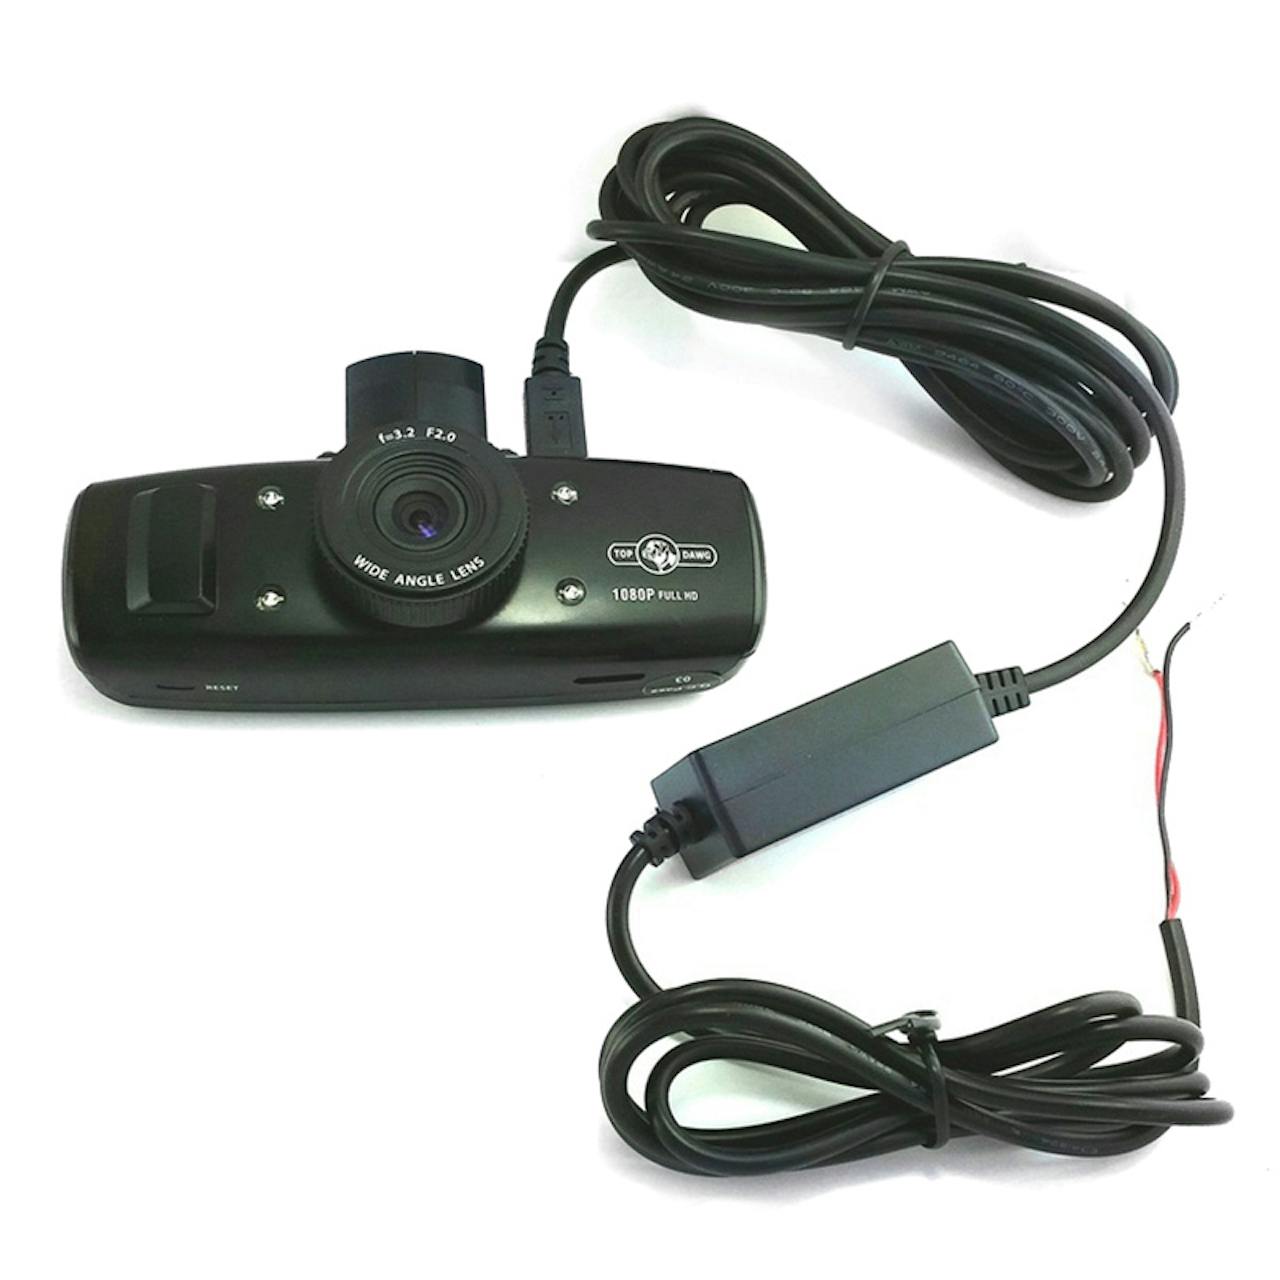 https://raneys-cdn11.imgix.net/images/stencil/original/products/196344/108348/12-Volt-Hard-Wire-Power-Cable-For-Dash-Cams-Connected-2-TDDVRCAM12VC__85710.1491407903.jpg?auto=compress,format&w=1280